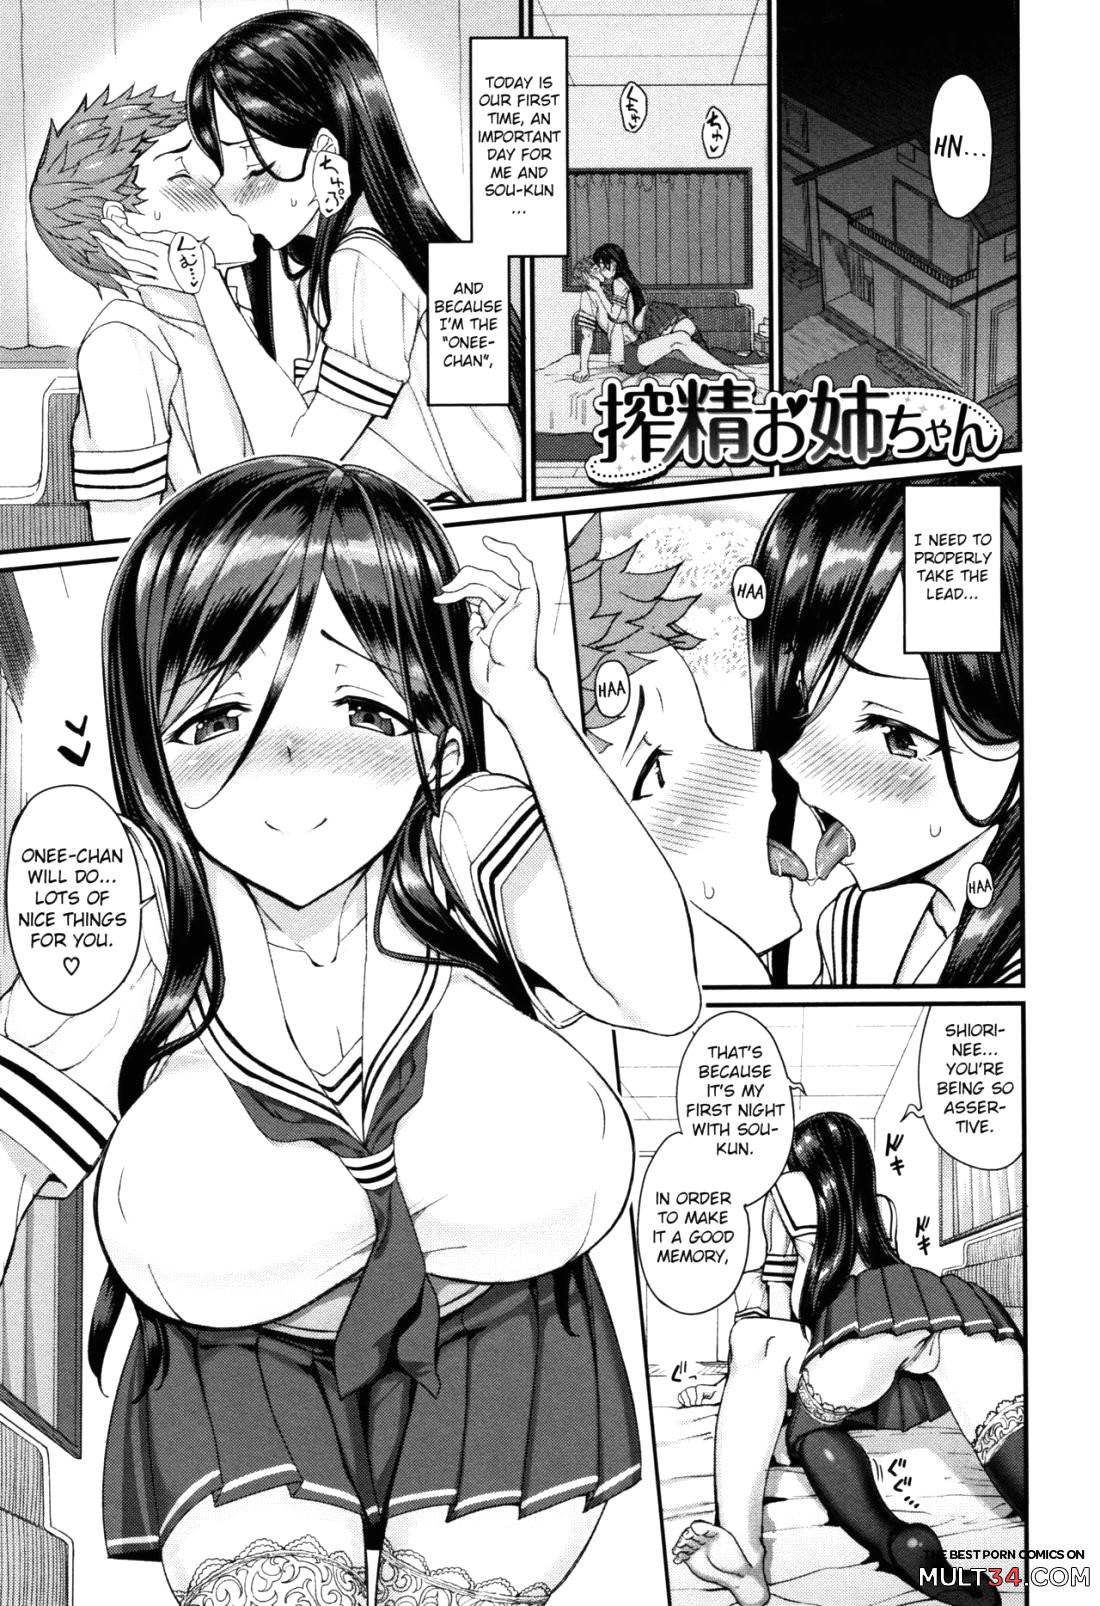 Milking Onee-chan page 1